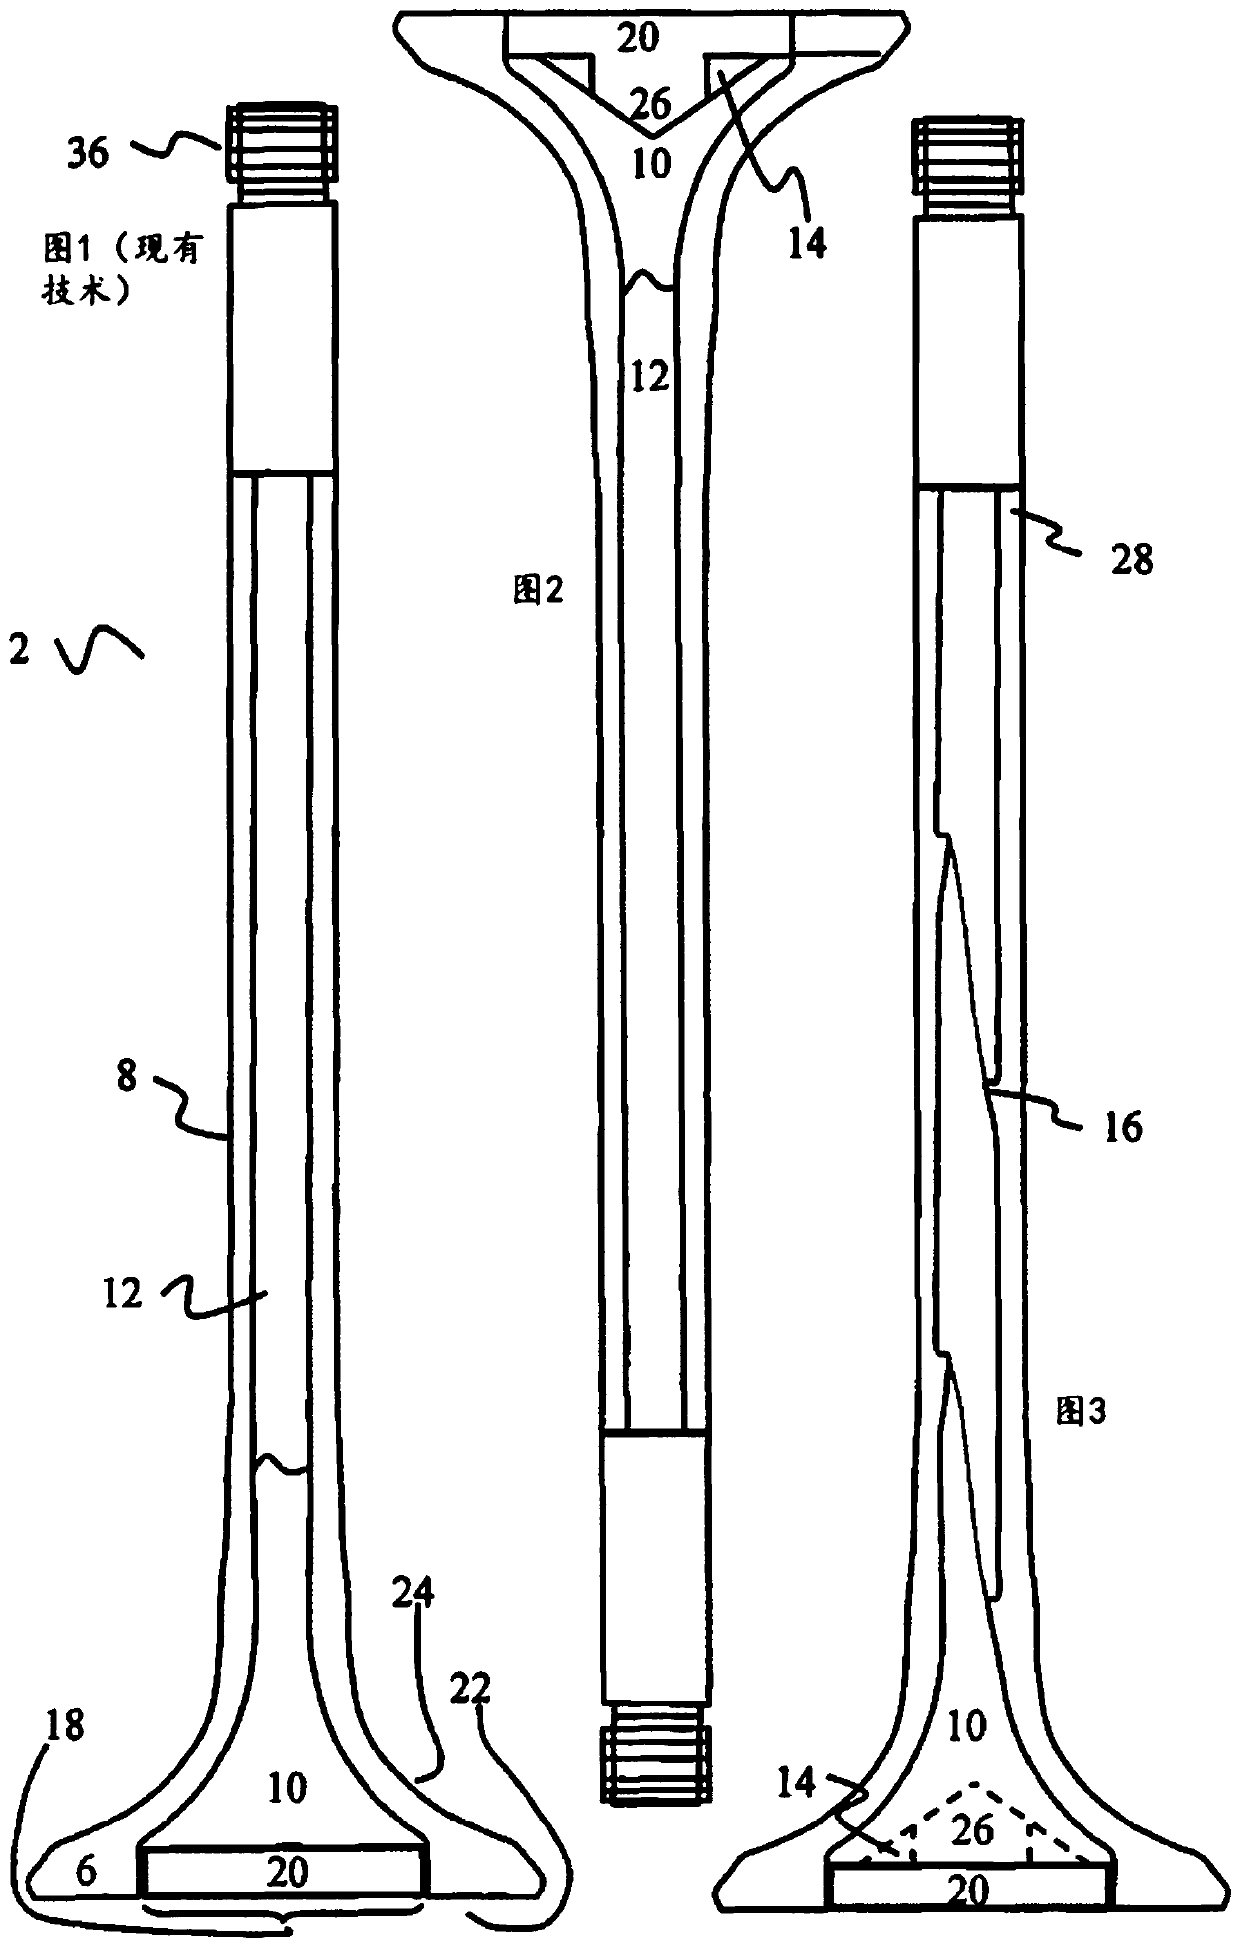 Valve with guide vanes for coolant for internal combustion engines